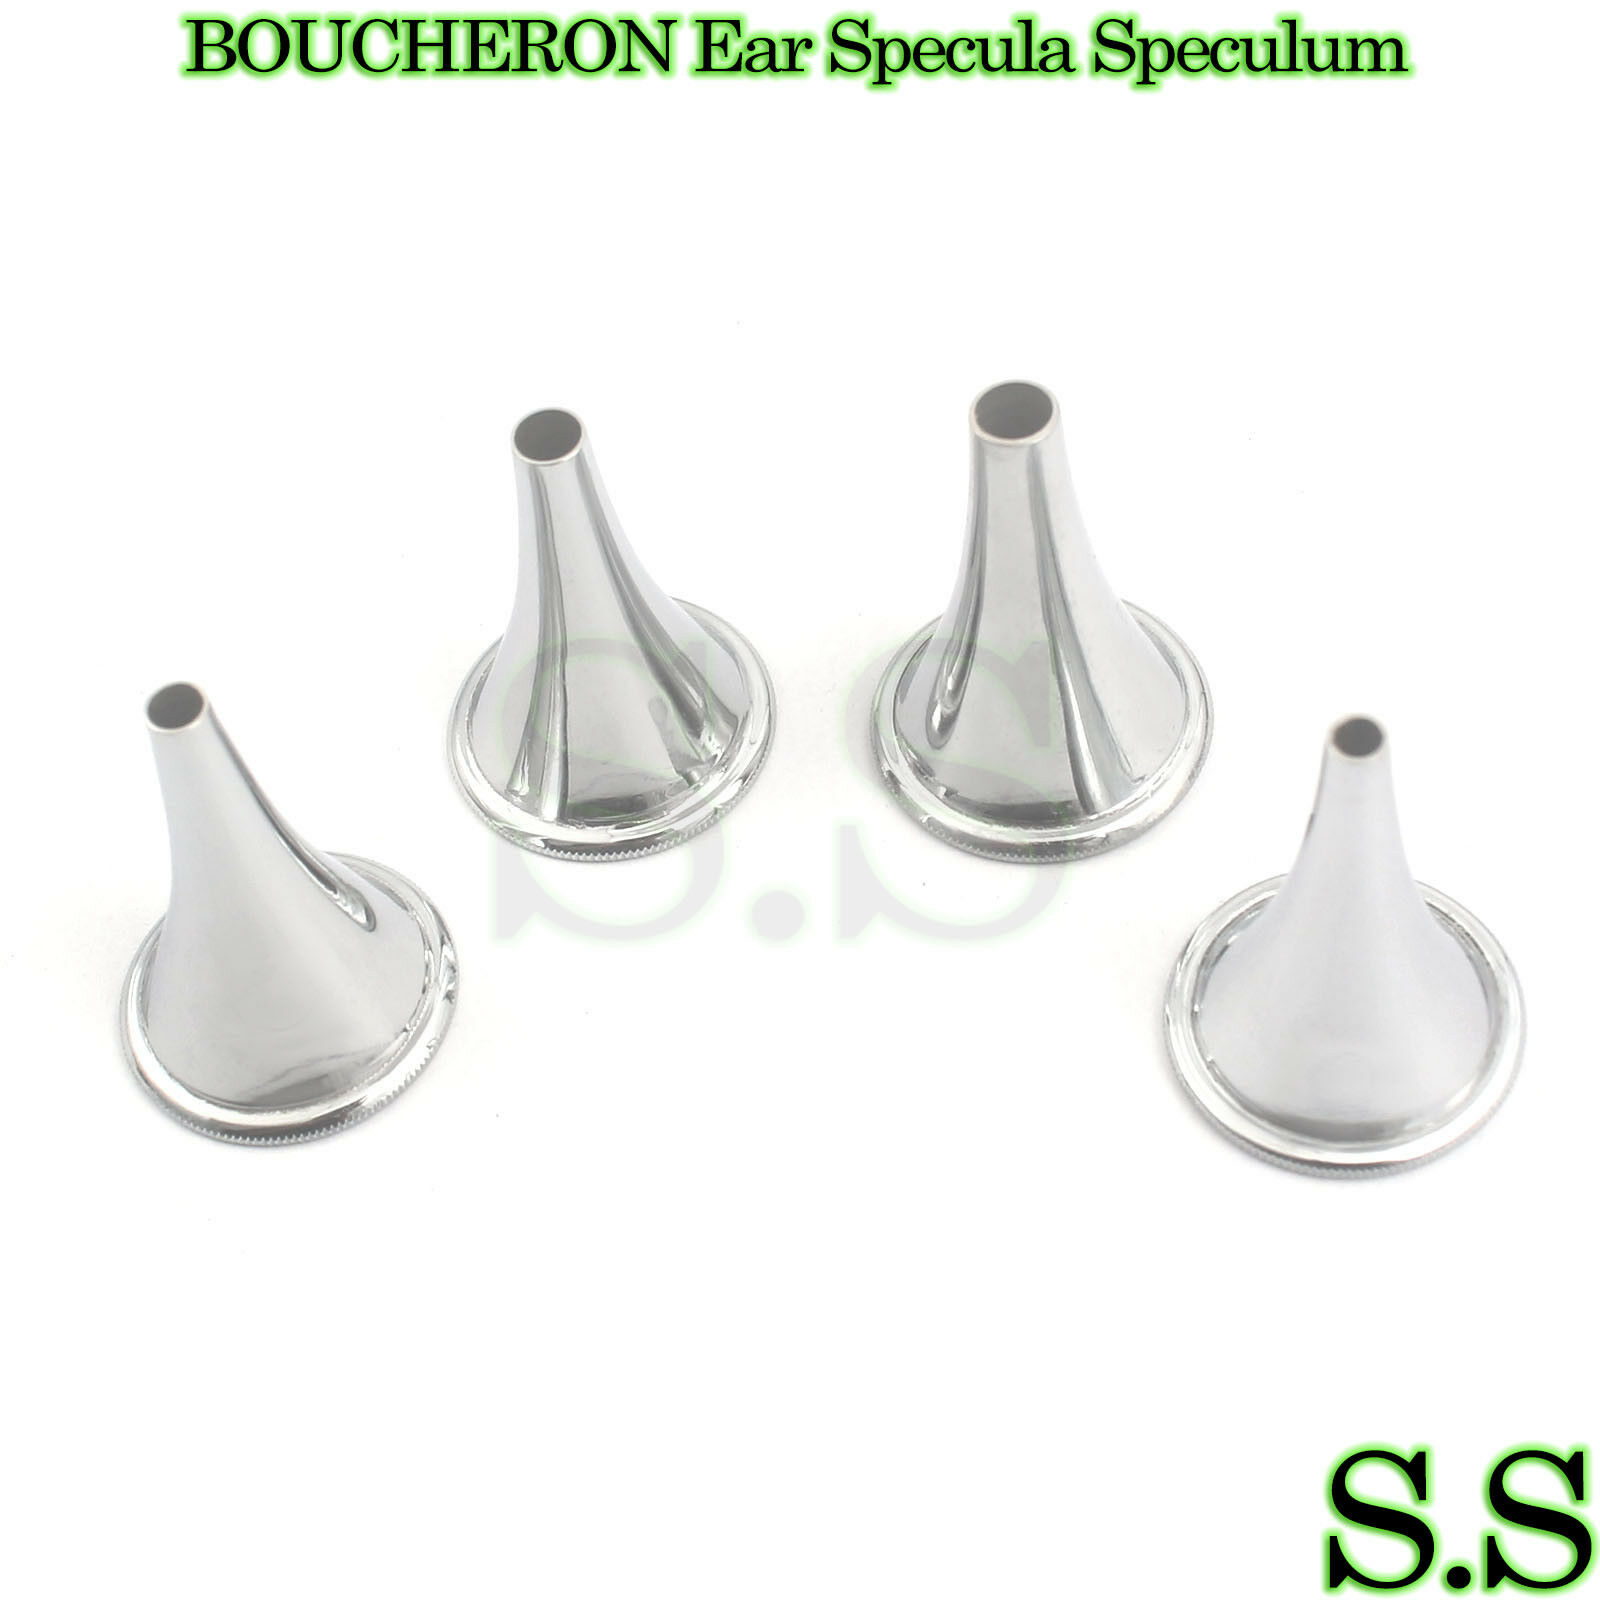 Boucheron Ear Specula Speculum Surgical Ent Instruments